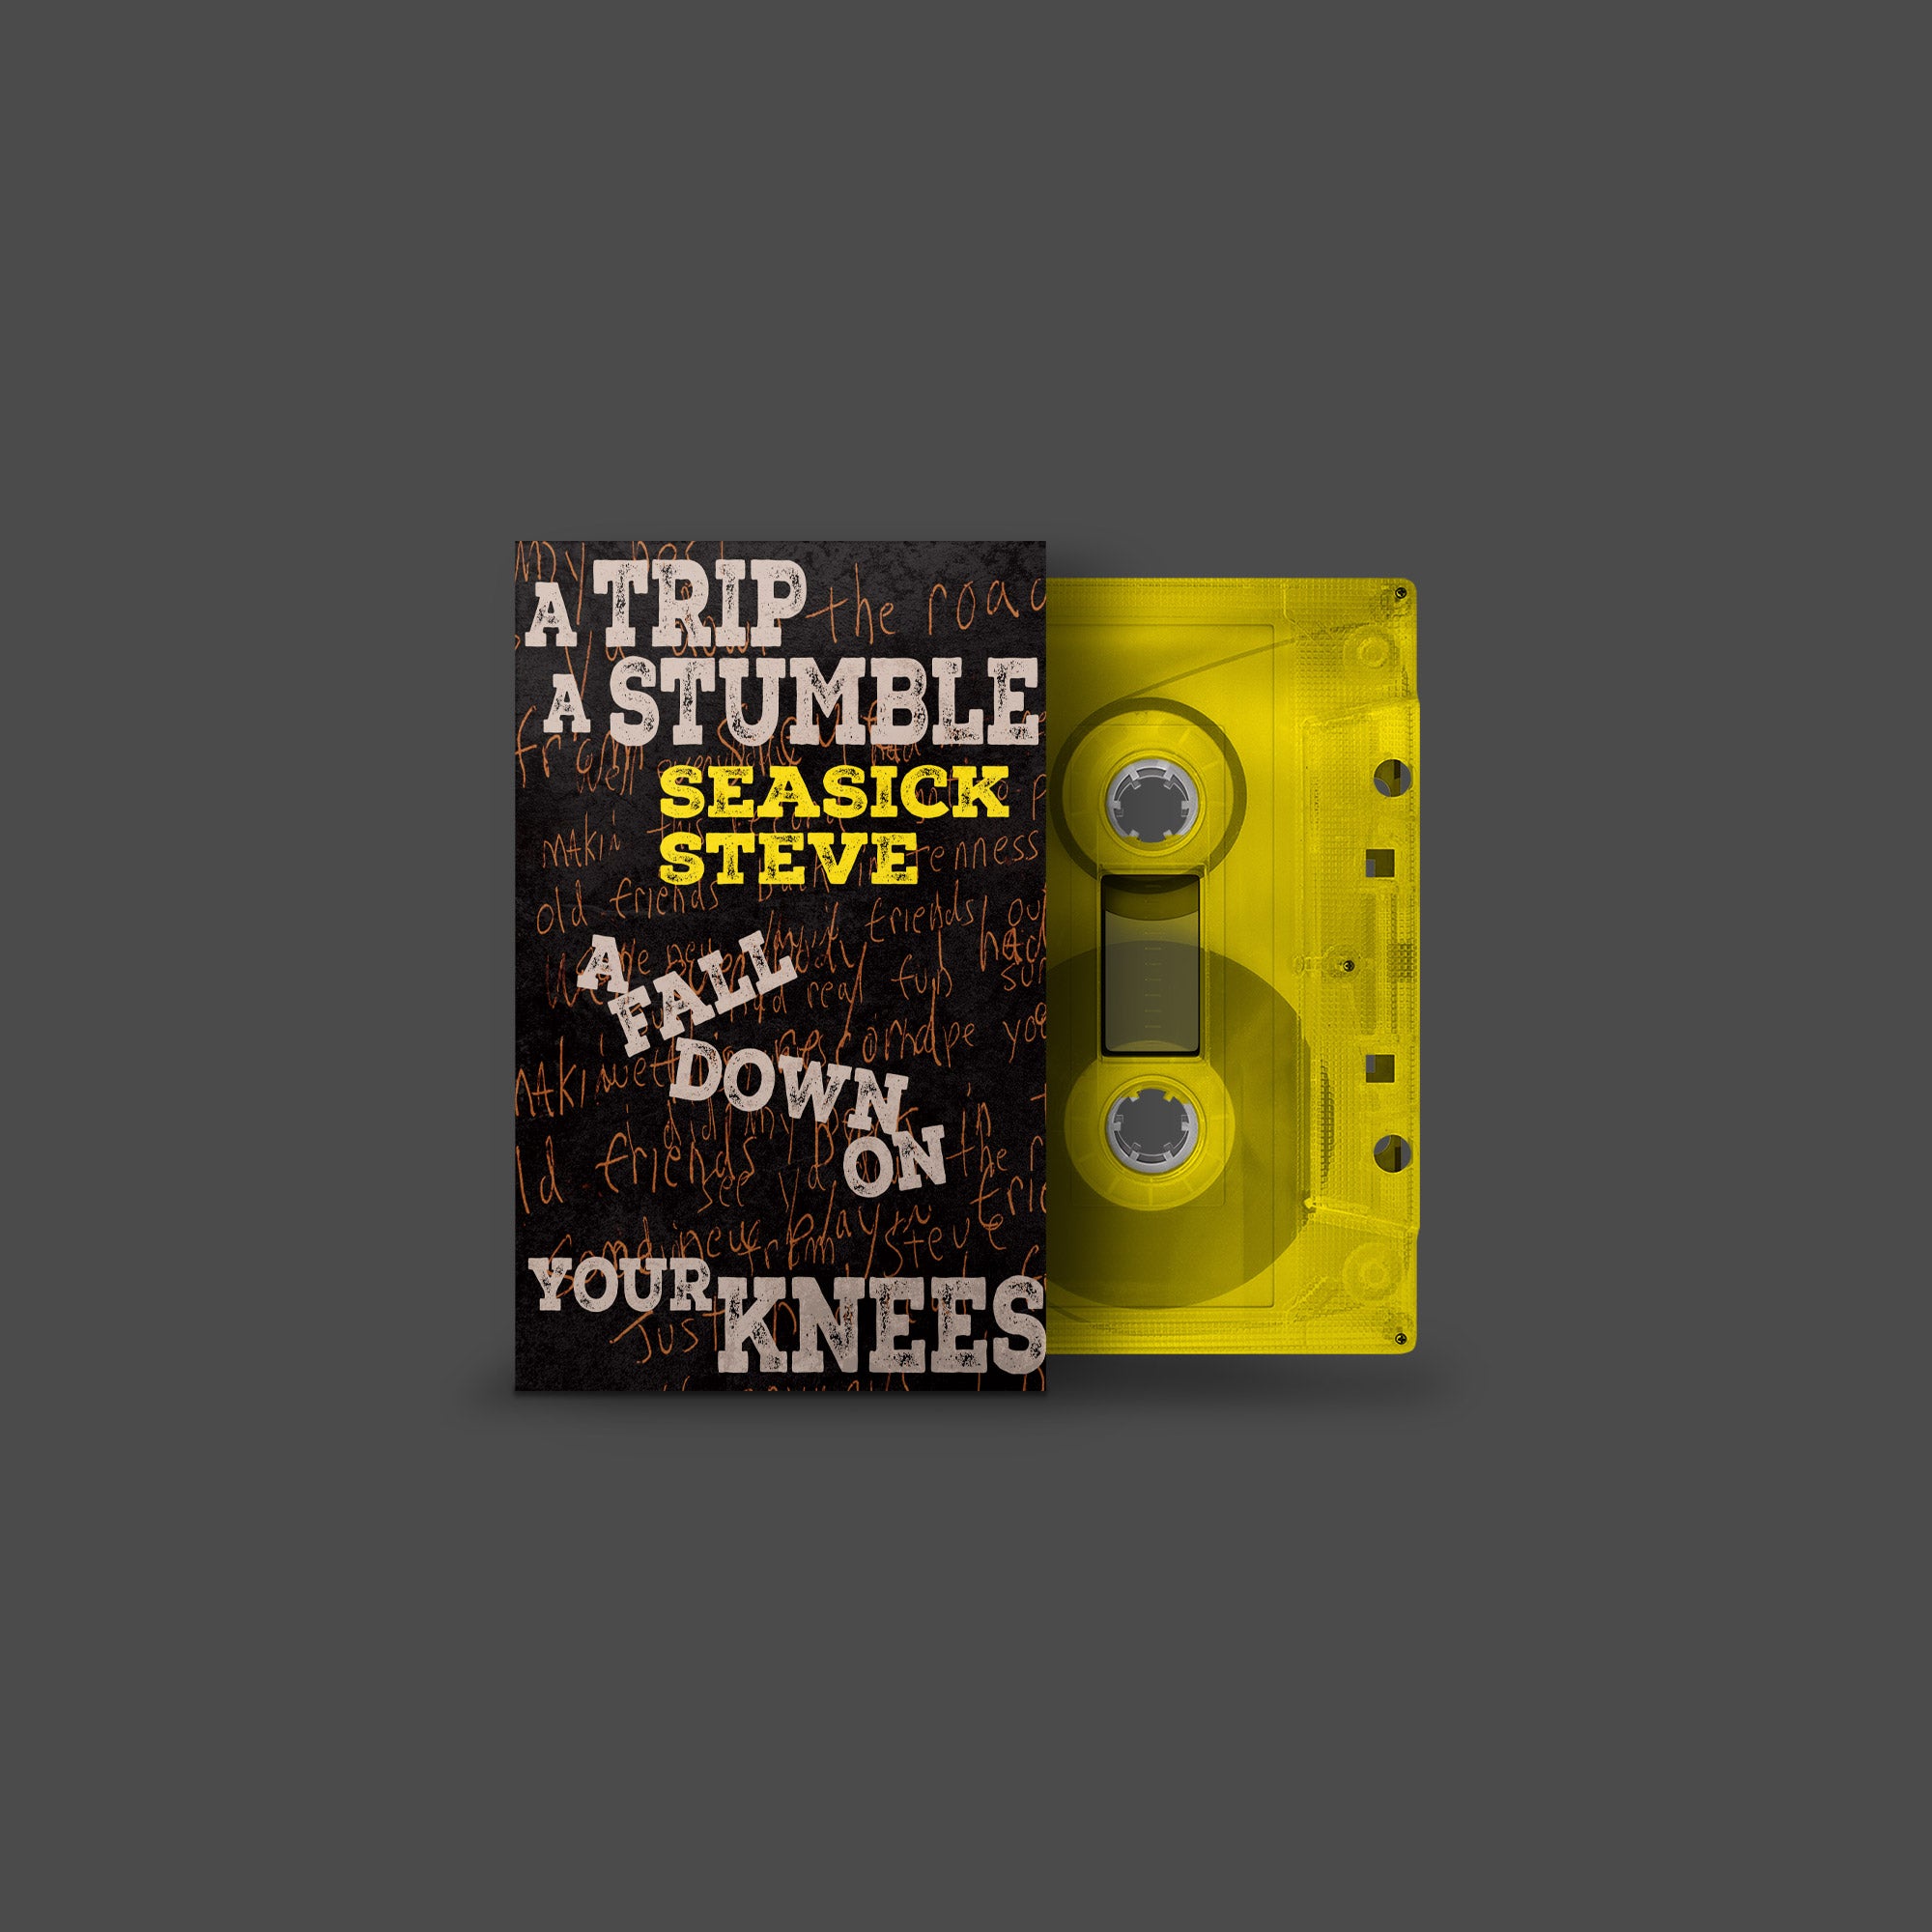 Seasick Steve - A Trip, A Stumble, A Fall Down On Your Knees: Transparent Yellow Cassette